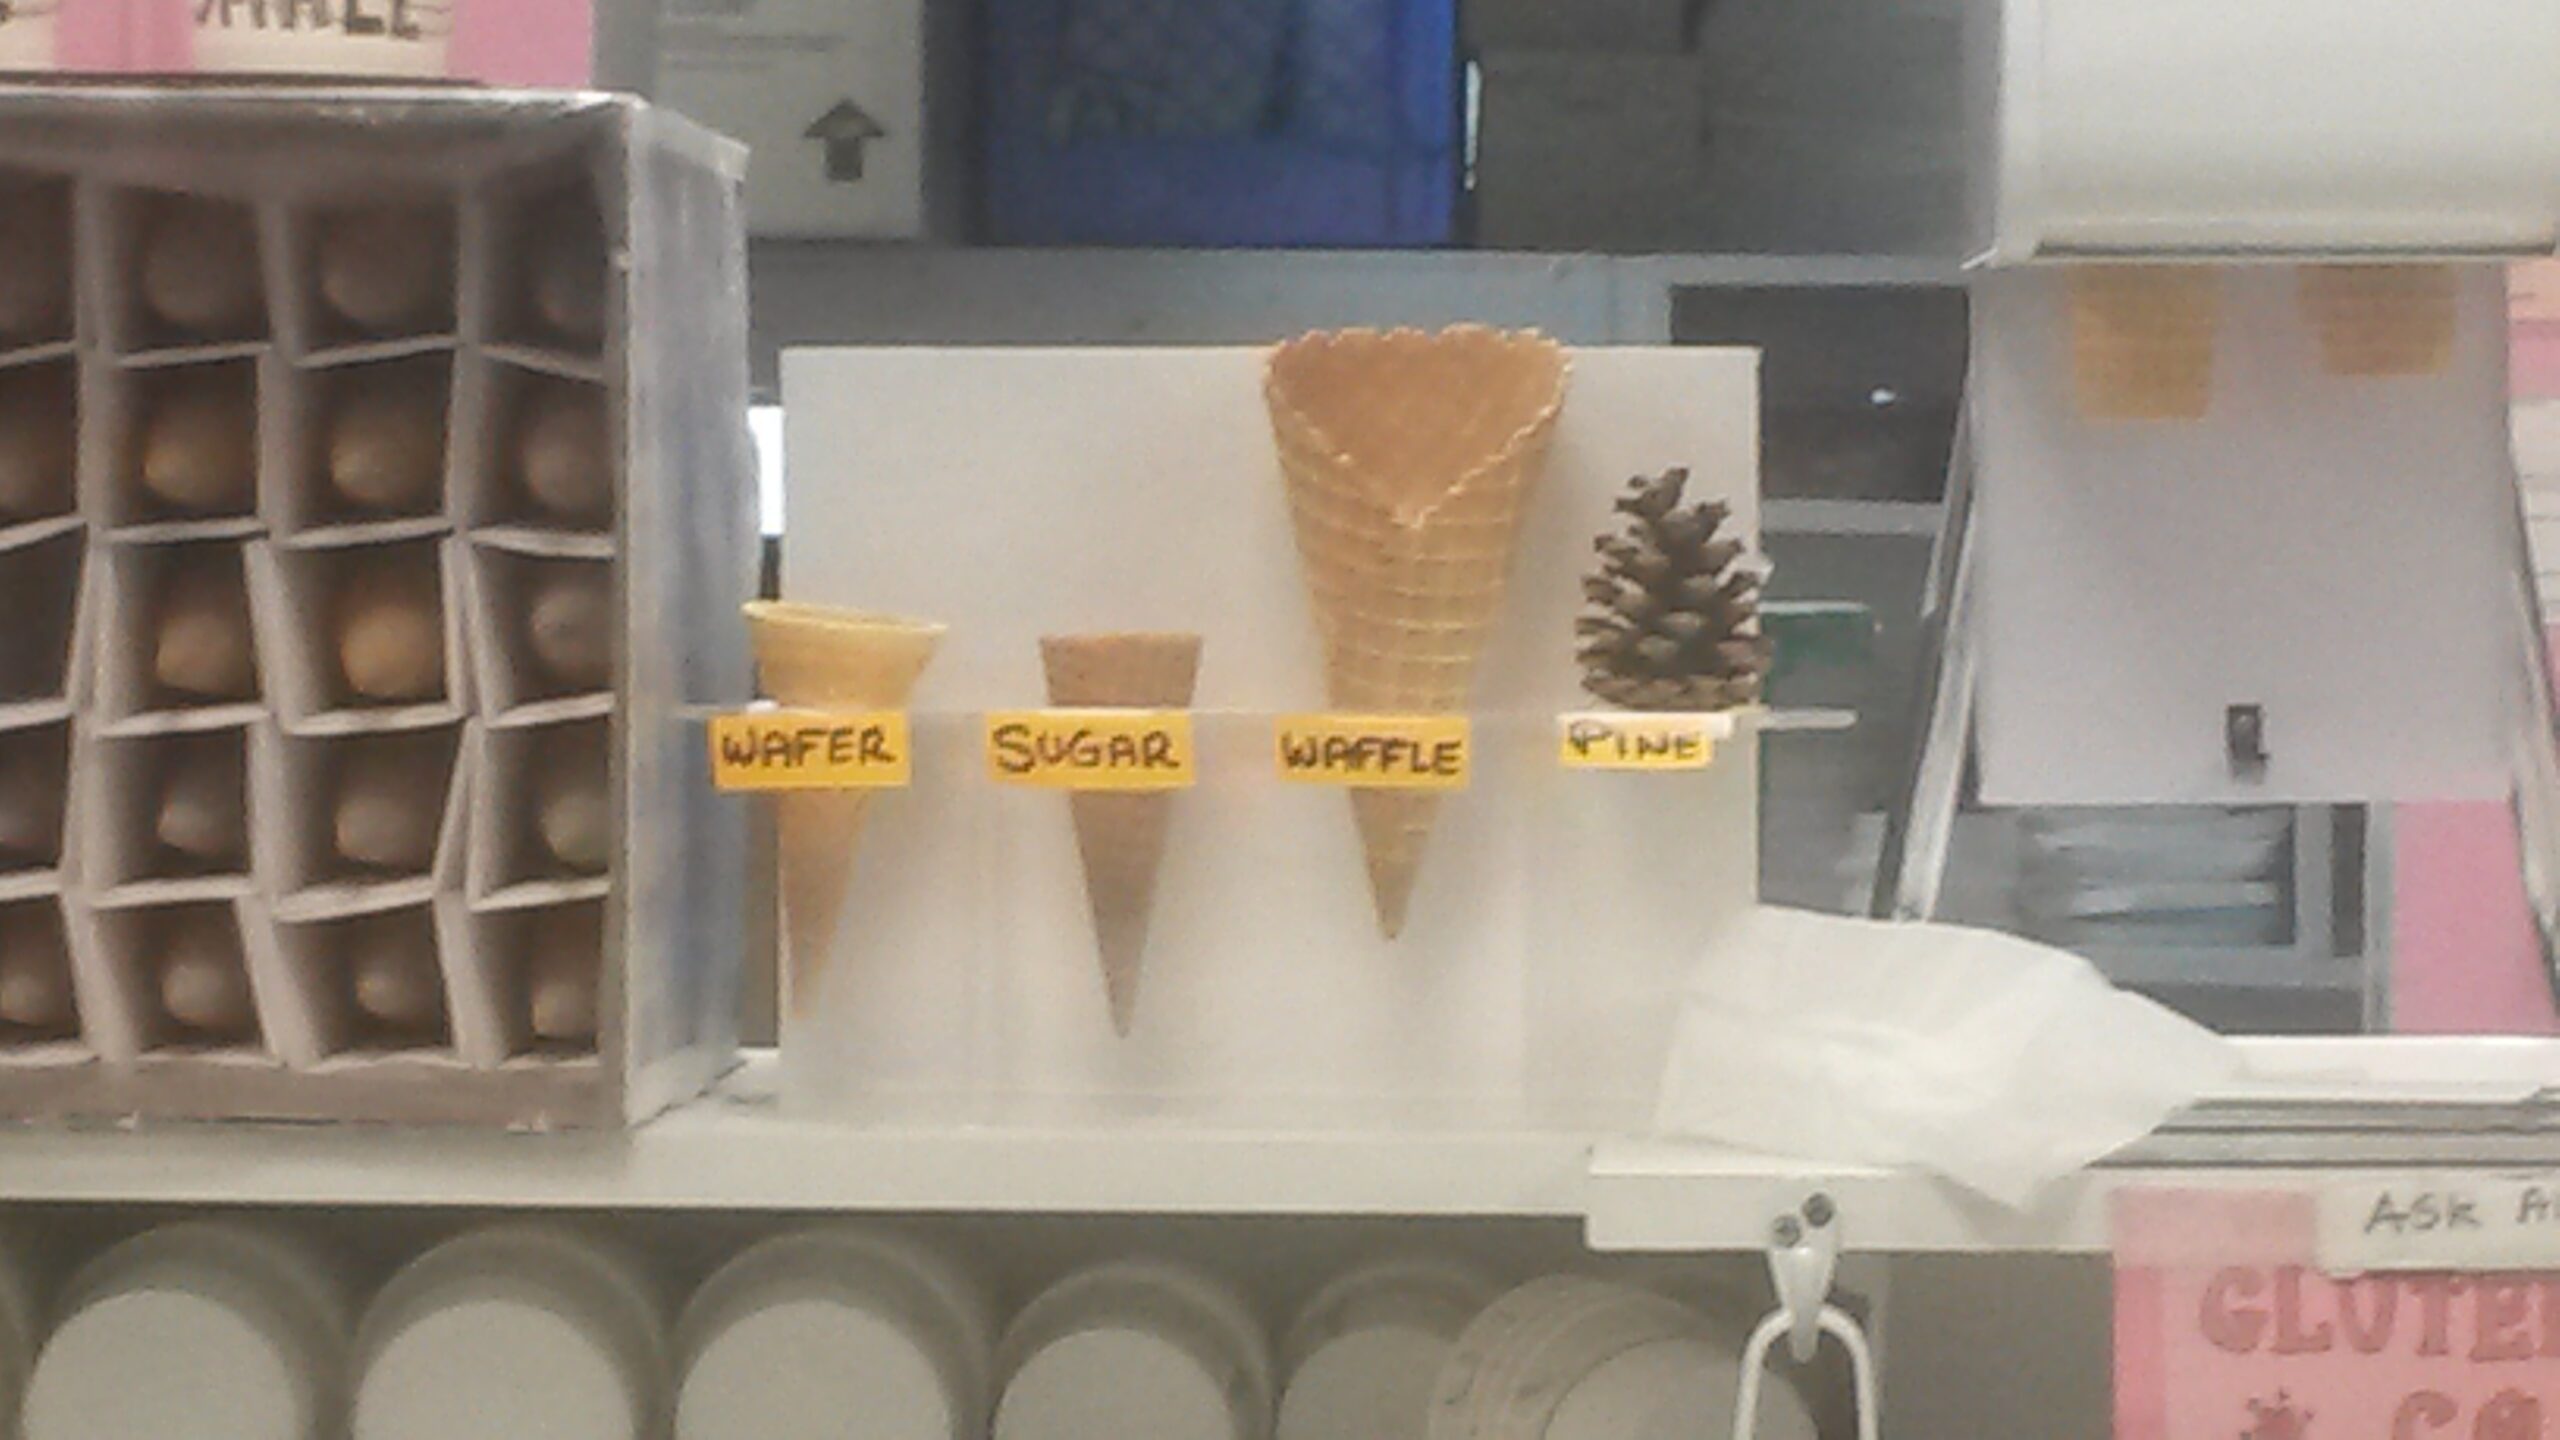 funny sign at ice cream shop where "pine" is labelled as a kind of cone